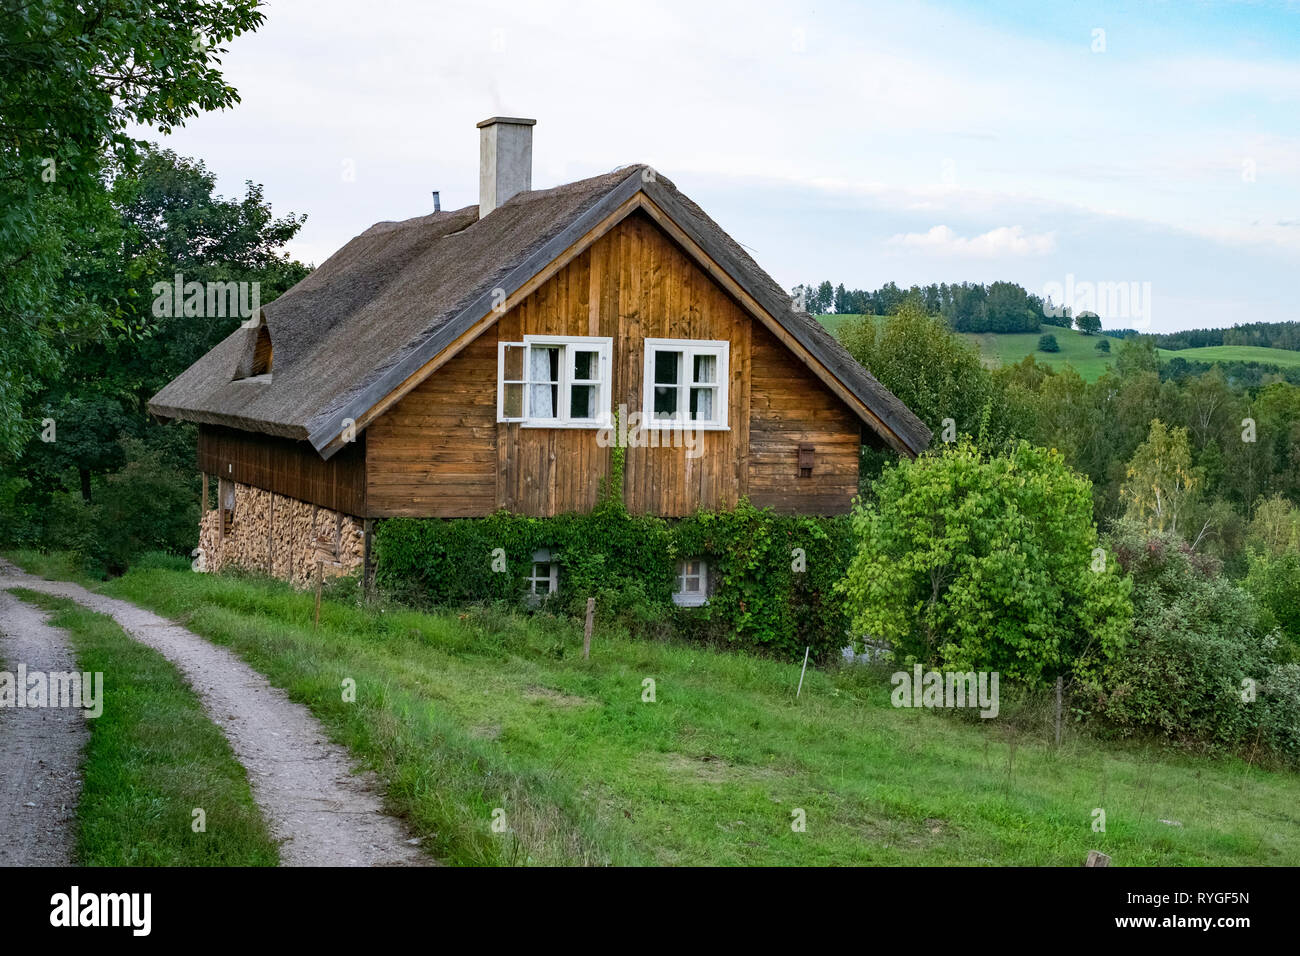 Rural wooden farm house with chimney in the hills and forest around Suwalki in northeastern Poland in the late summer. Stock Photo